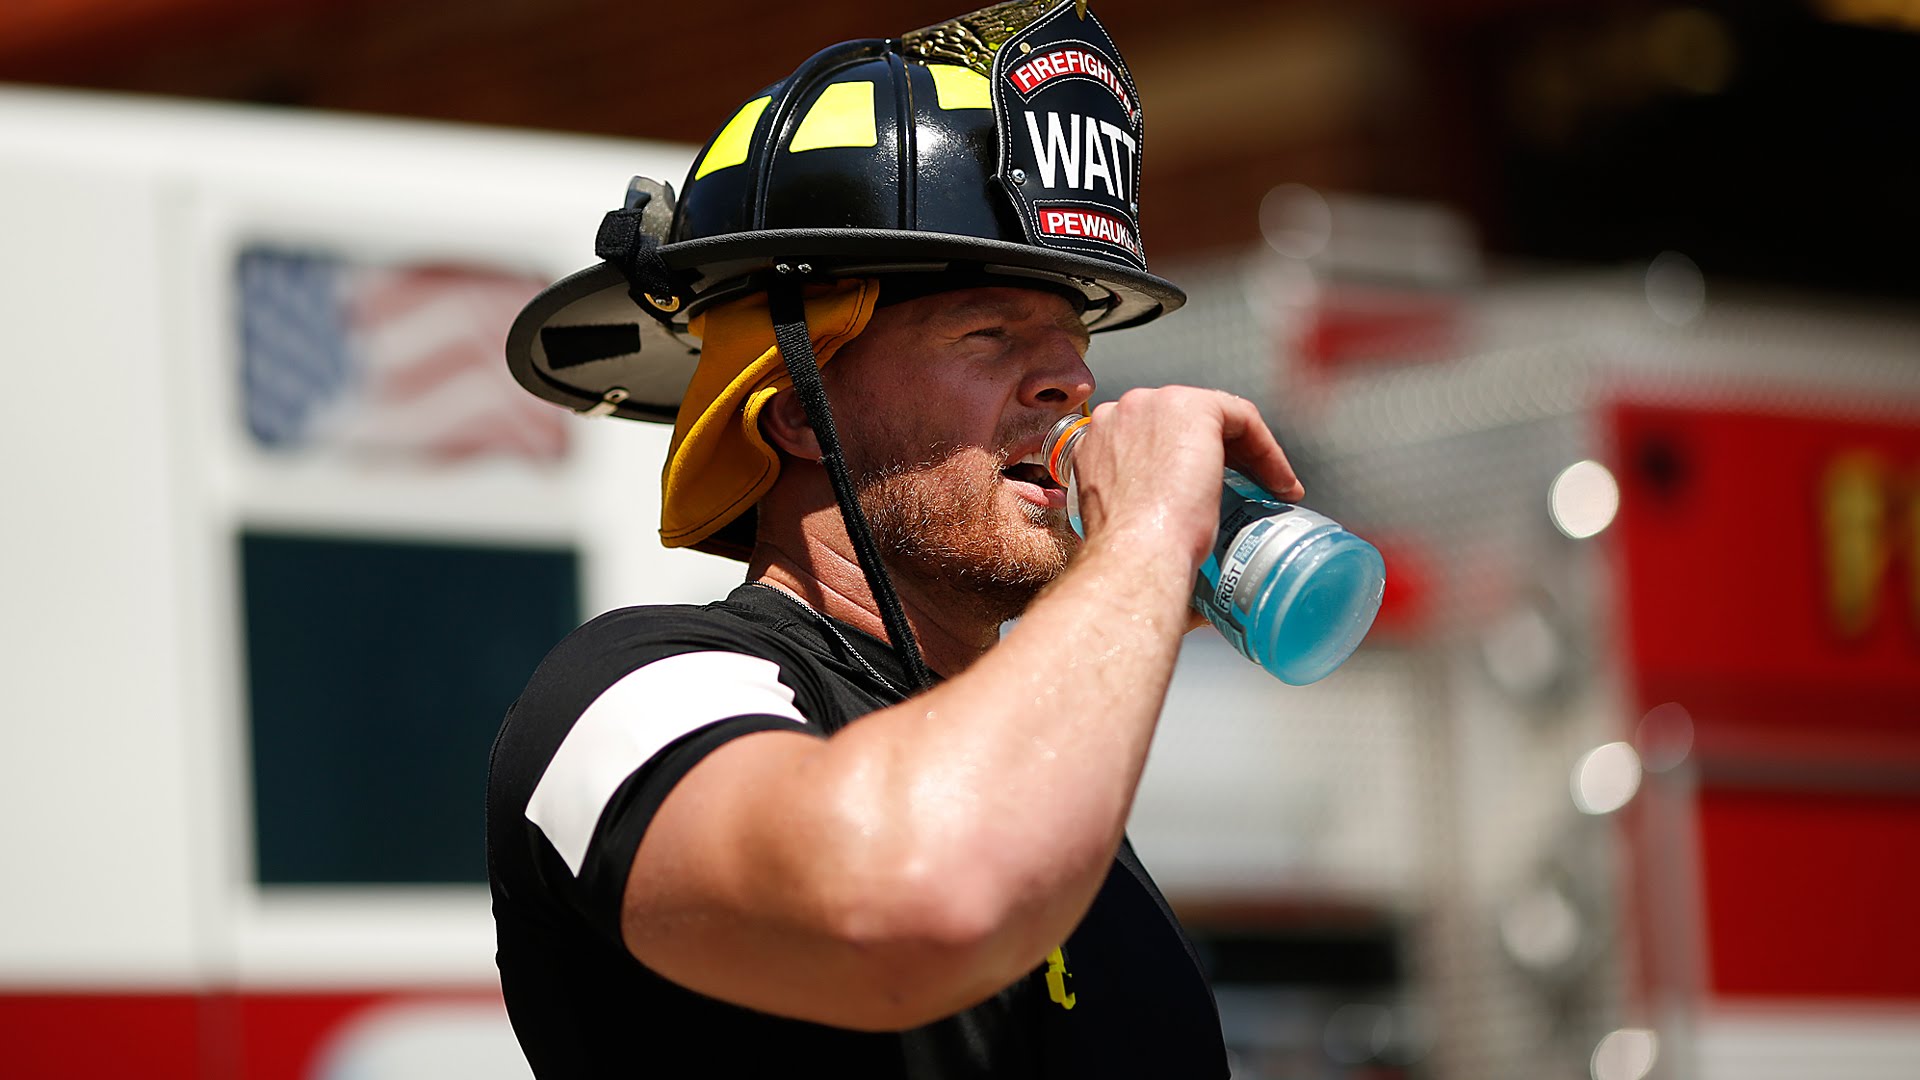 JJ Watt returns to Wisconsin to train with Fire Fighters